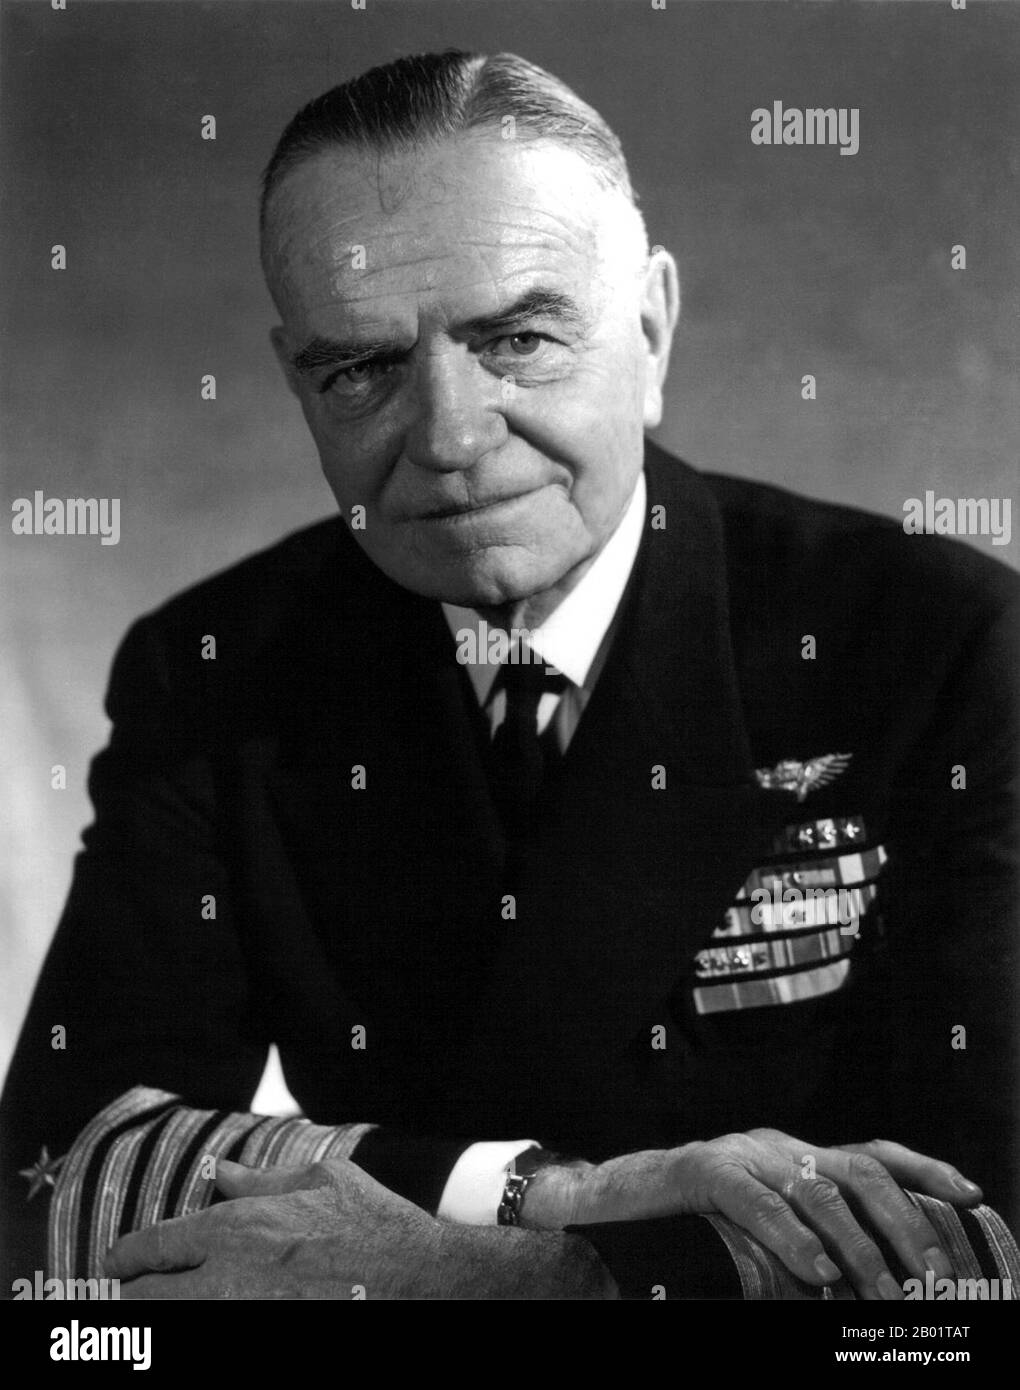 USA: Admiral William Frederick 'Bull' Halsey (30 October 1882 - 16 August 1959), 1945.  Fleet Admiral William Frederick Halsey, Jr. (commonly referred to as 'Bill' or 'Bull' Halsey) was a U.S. Naval officer. He commanded the South Pacific Area during the early stages of the Pacific War against Japan. Later he was commander of the Third Fleet through the duration of hostilities. Stock Photo